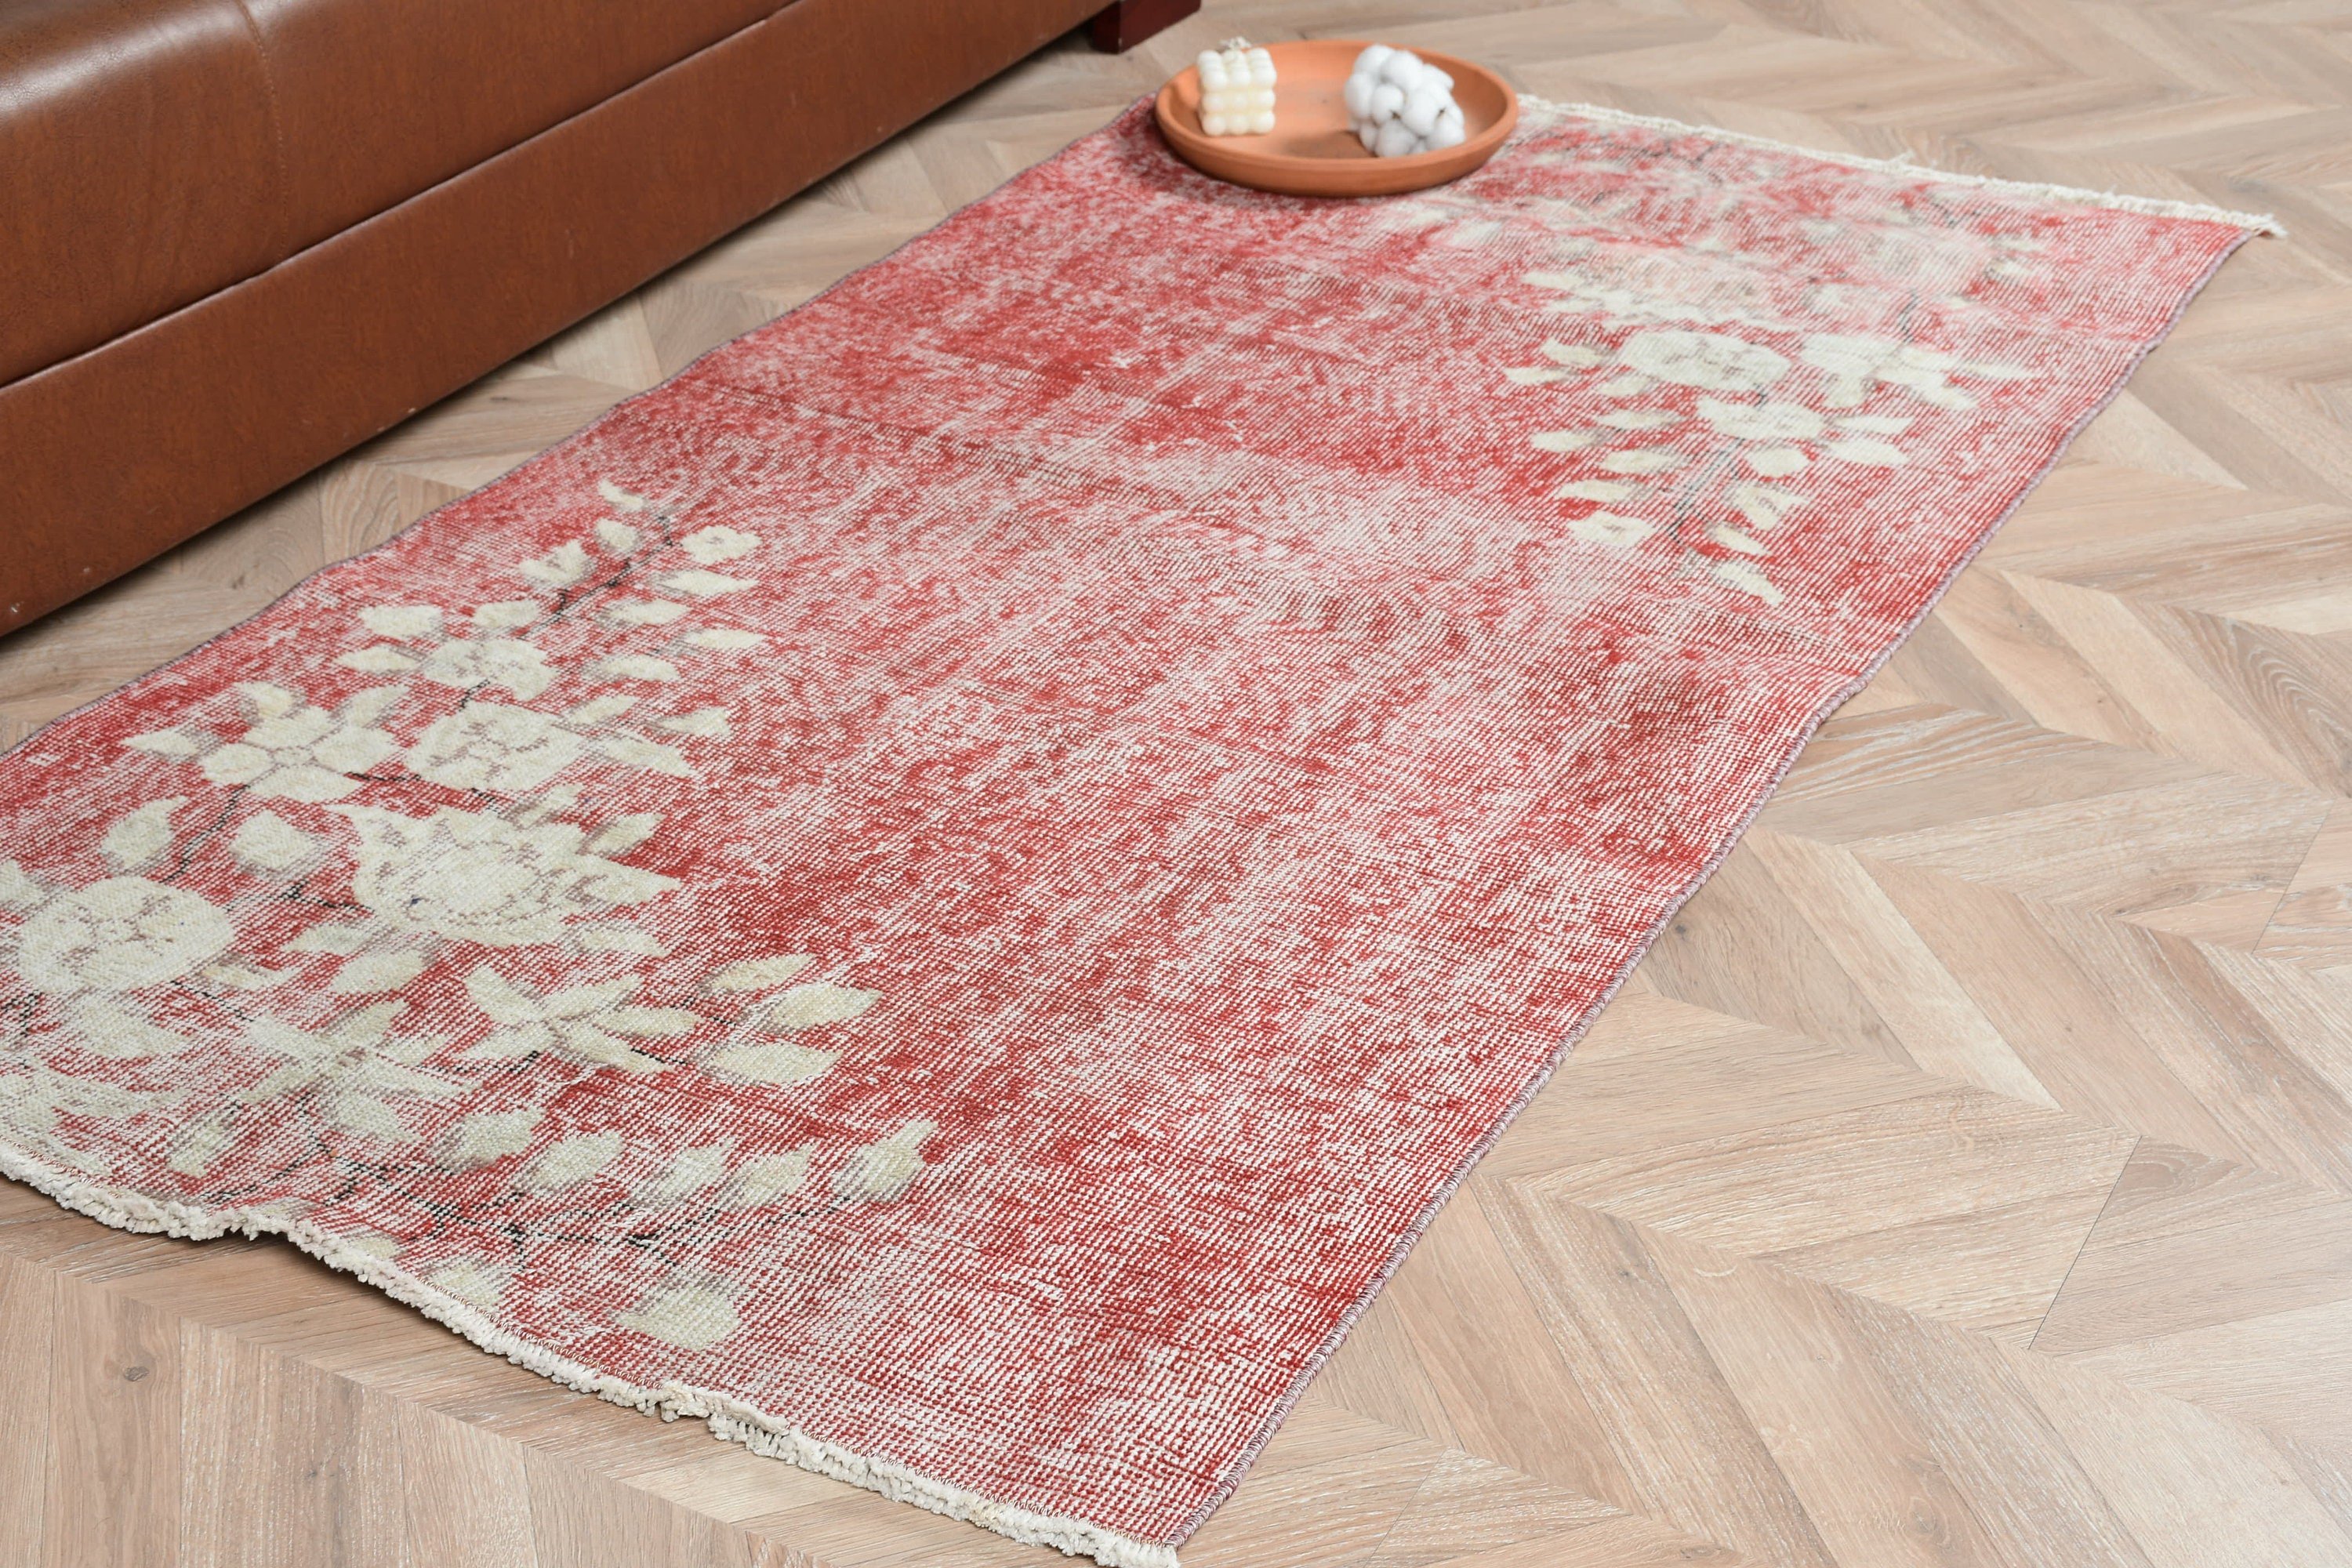 3.1x5.8 ft Accent Rugs, Home Decor Rug, Turkish Rug, Cool Rugs, Vintage Rug, Bohemian Rug, Bedroom Rug, Kitchen Rug, Red Anatolian Rugs